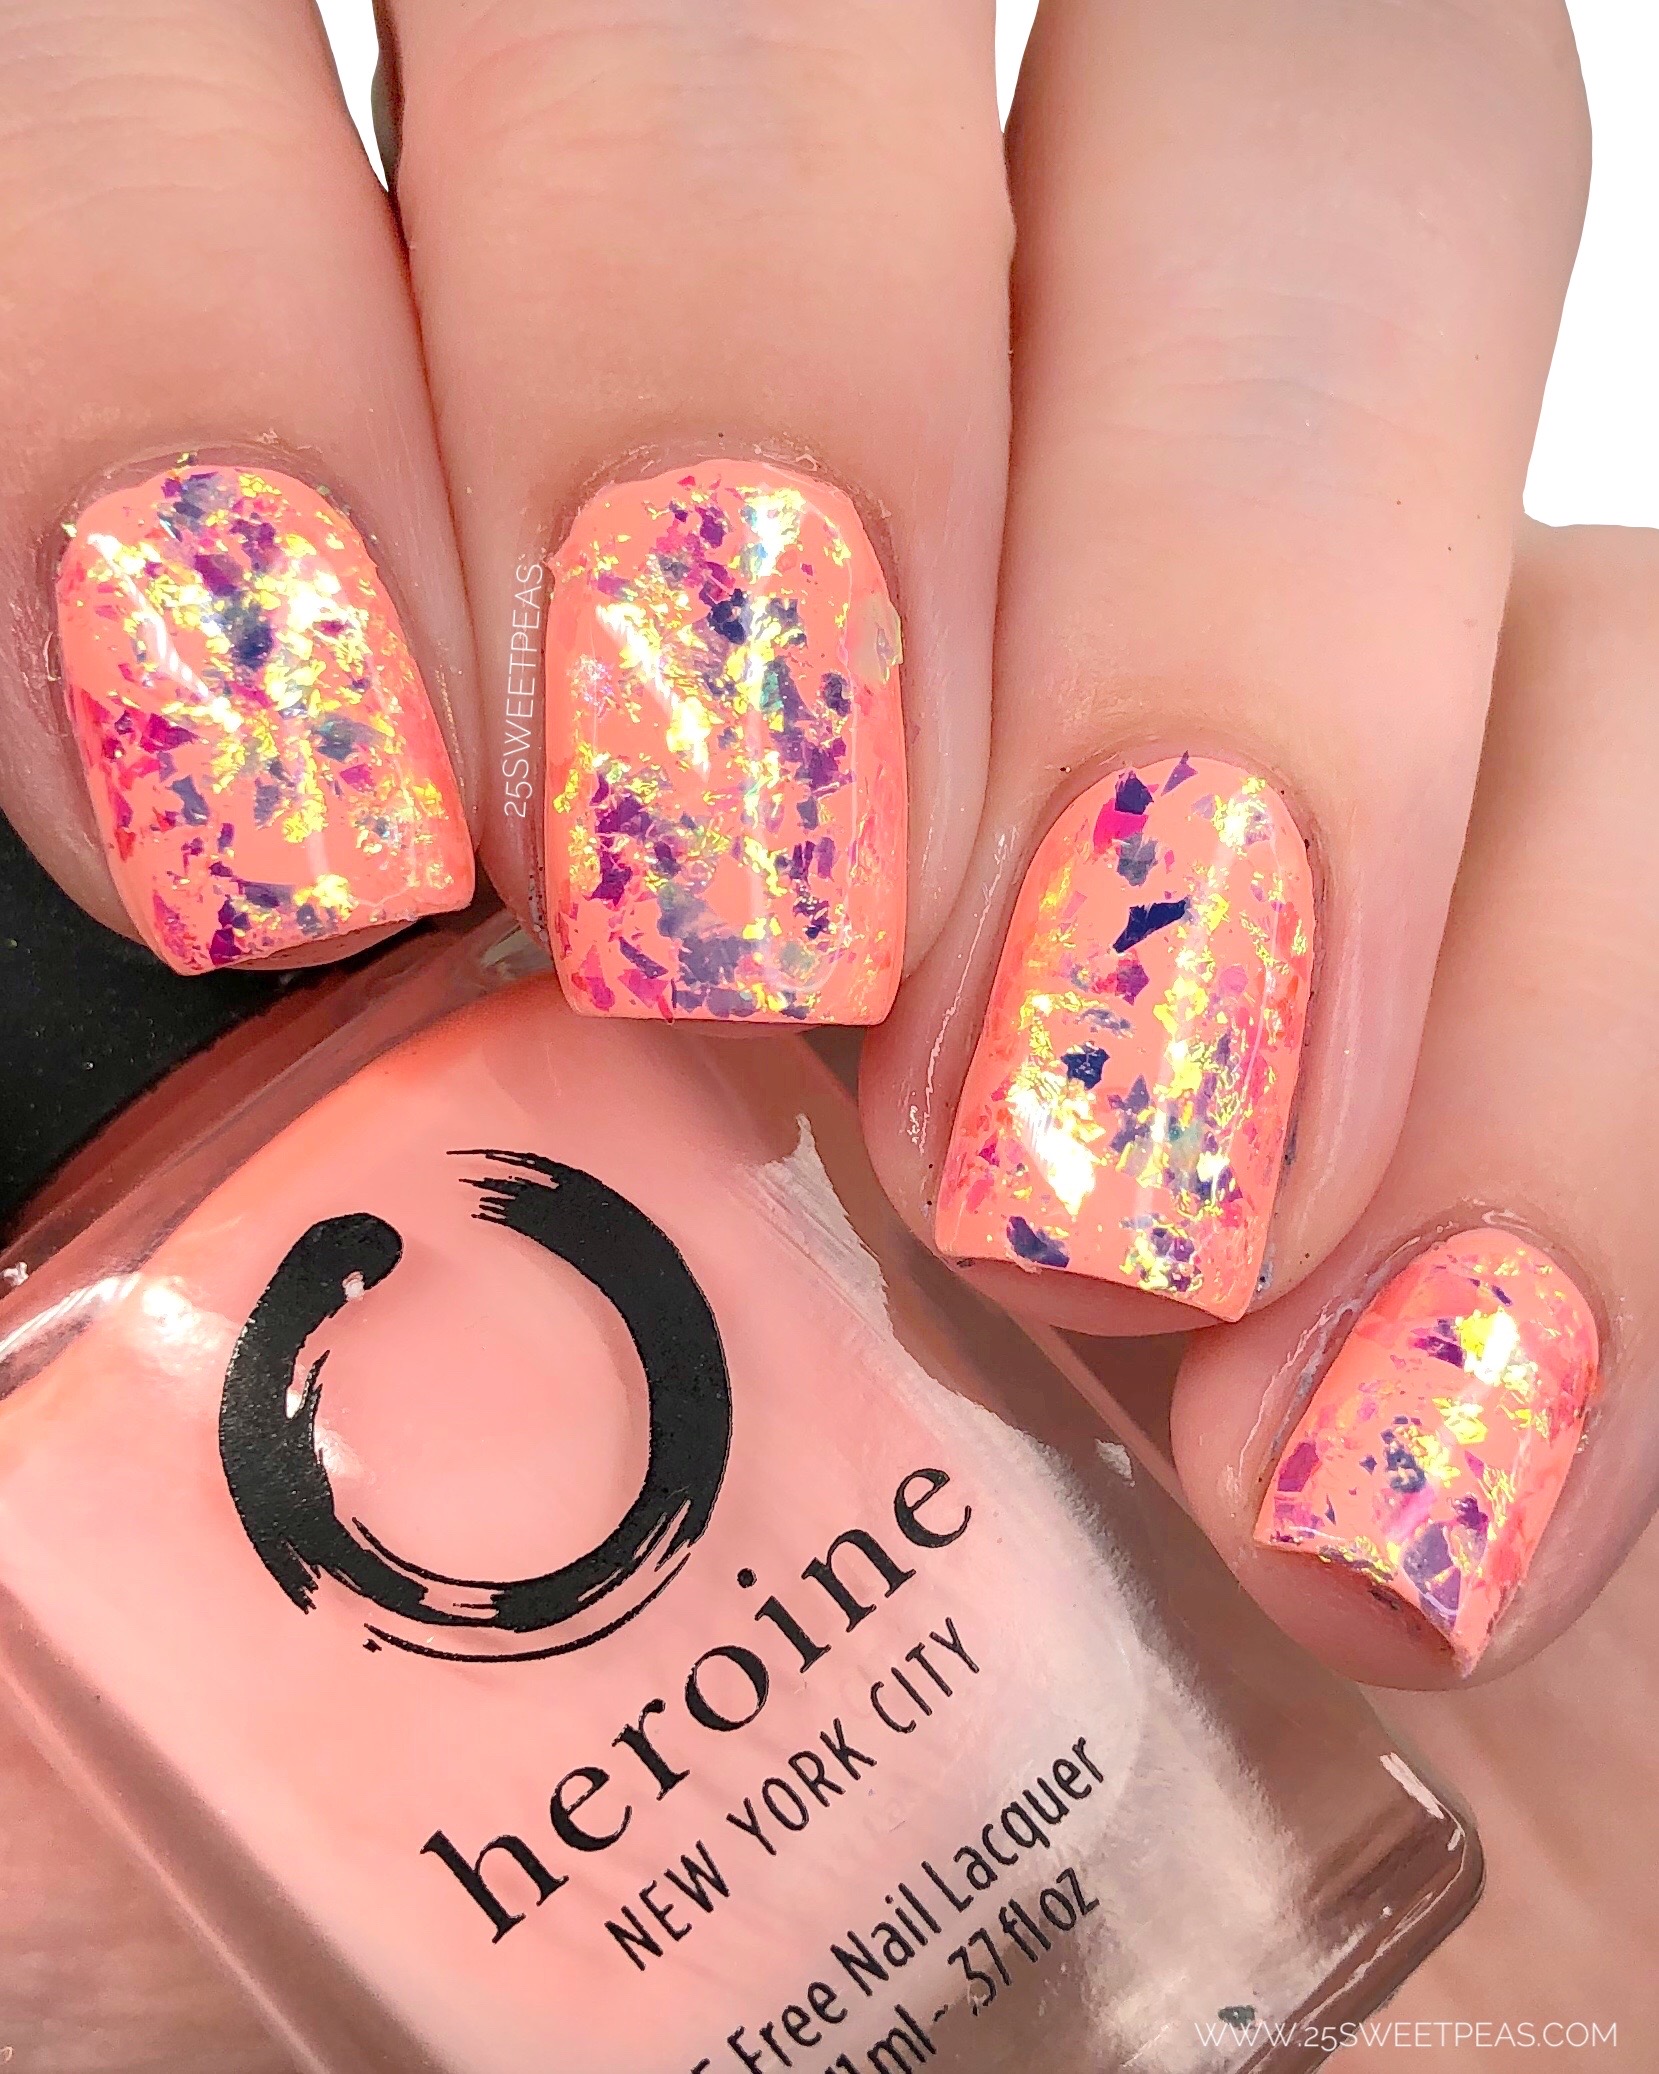 Trying Whats Up Nails Aurora Supreme Flakies — 25 Sweetpeas